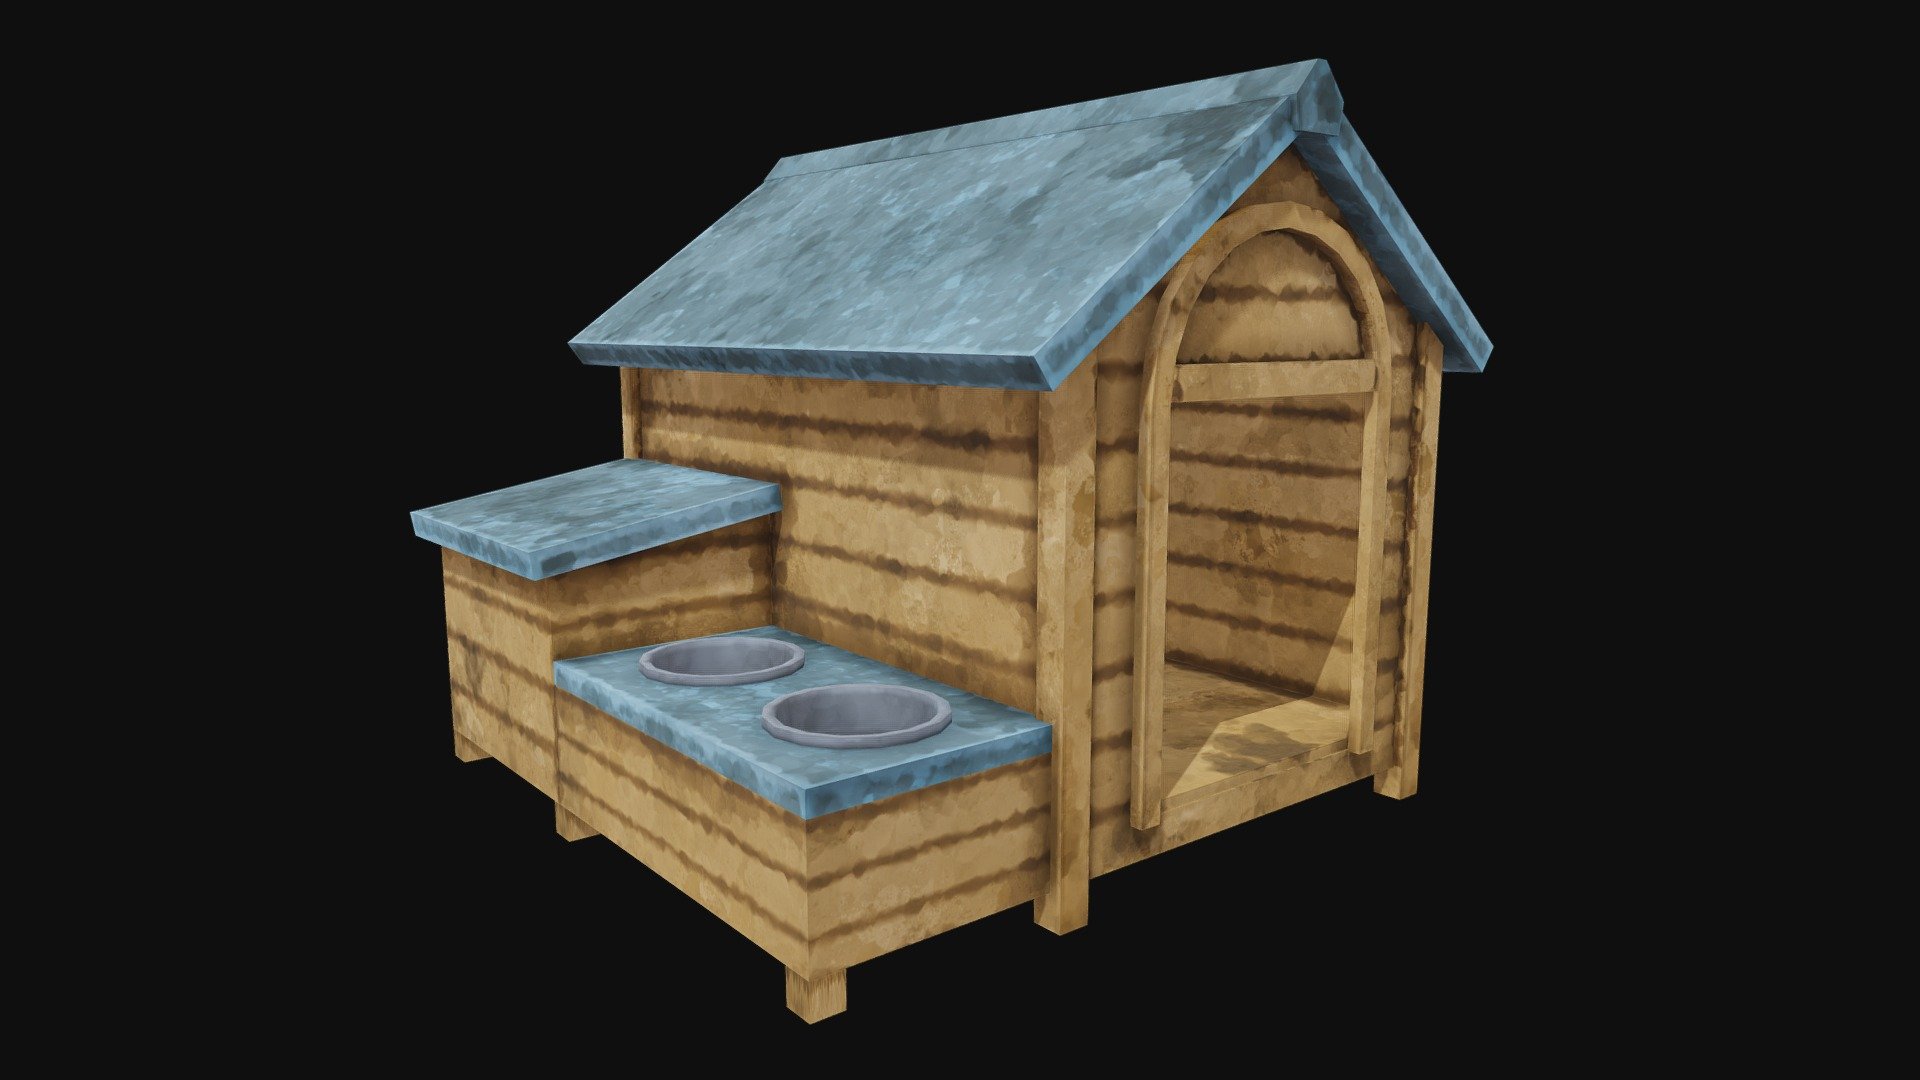 Low Poly Dog House for your renders and games

Textures:

Diffuse color, Roughness, Metallic

All textures are 2K

Files Formats:

Blend

Fbx

Obj - dog house - Buy Royalty Free 3D model by Vanessa Araújo (@vanessa3d) 3d model